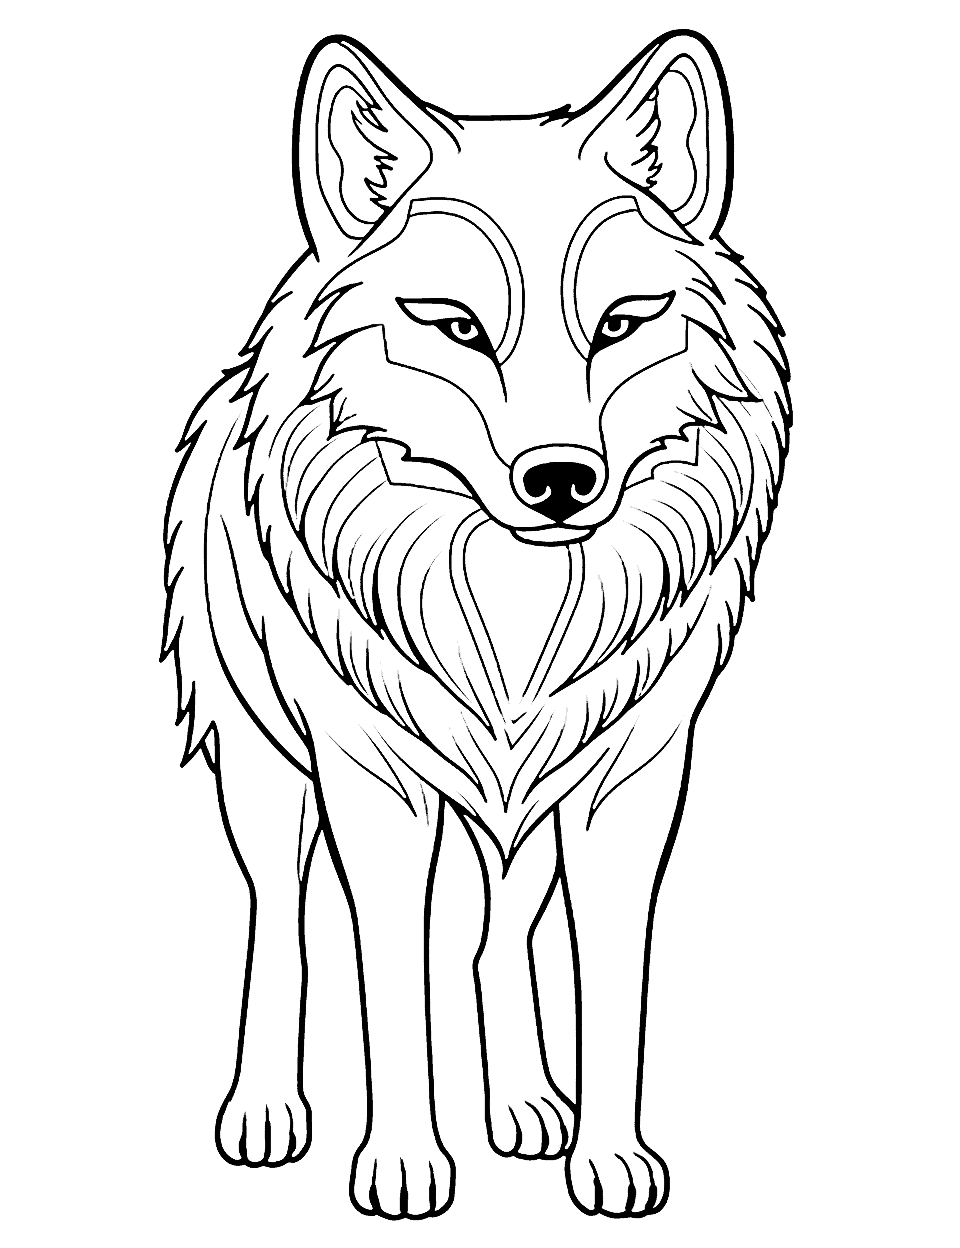 Wolf Fur Coloring Page - A wolf with a long, thick coat of fur.